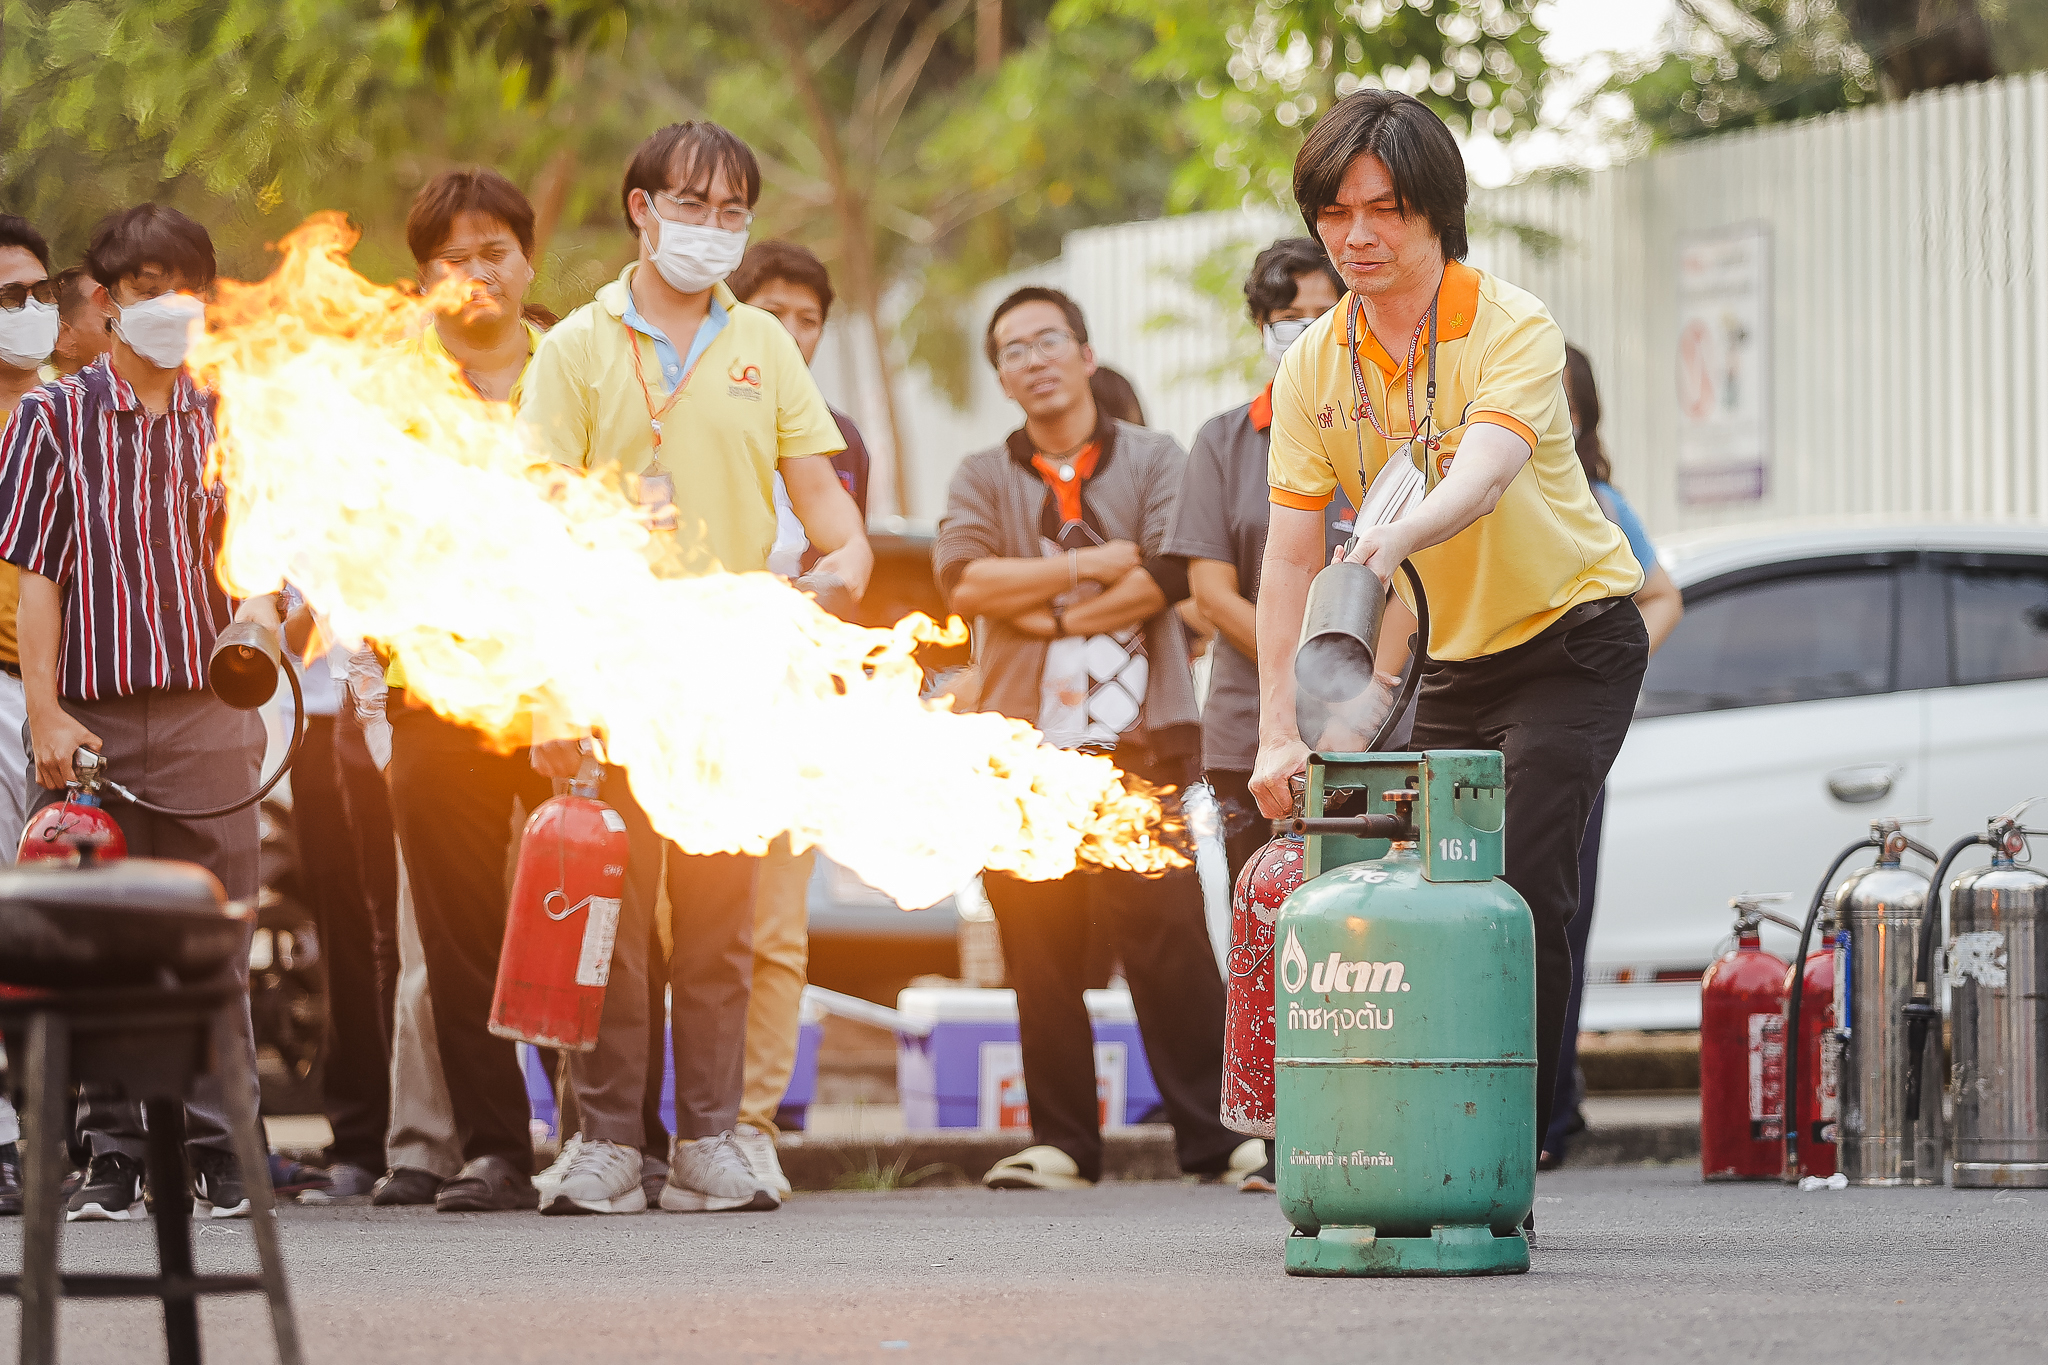 EESH Conducts Basic Firefighting Training for the Staff of the President’s Office Building